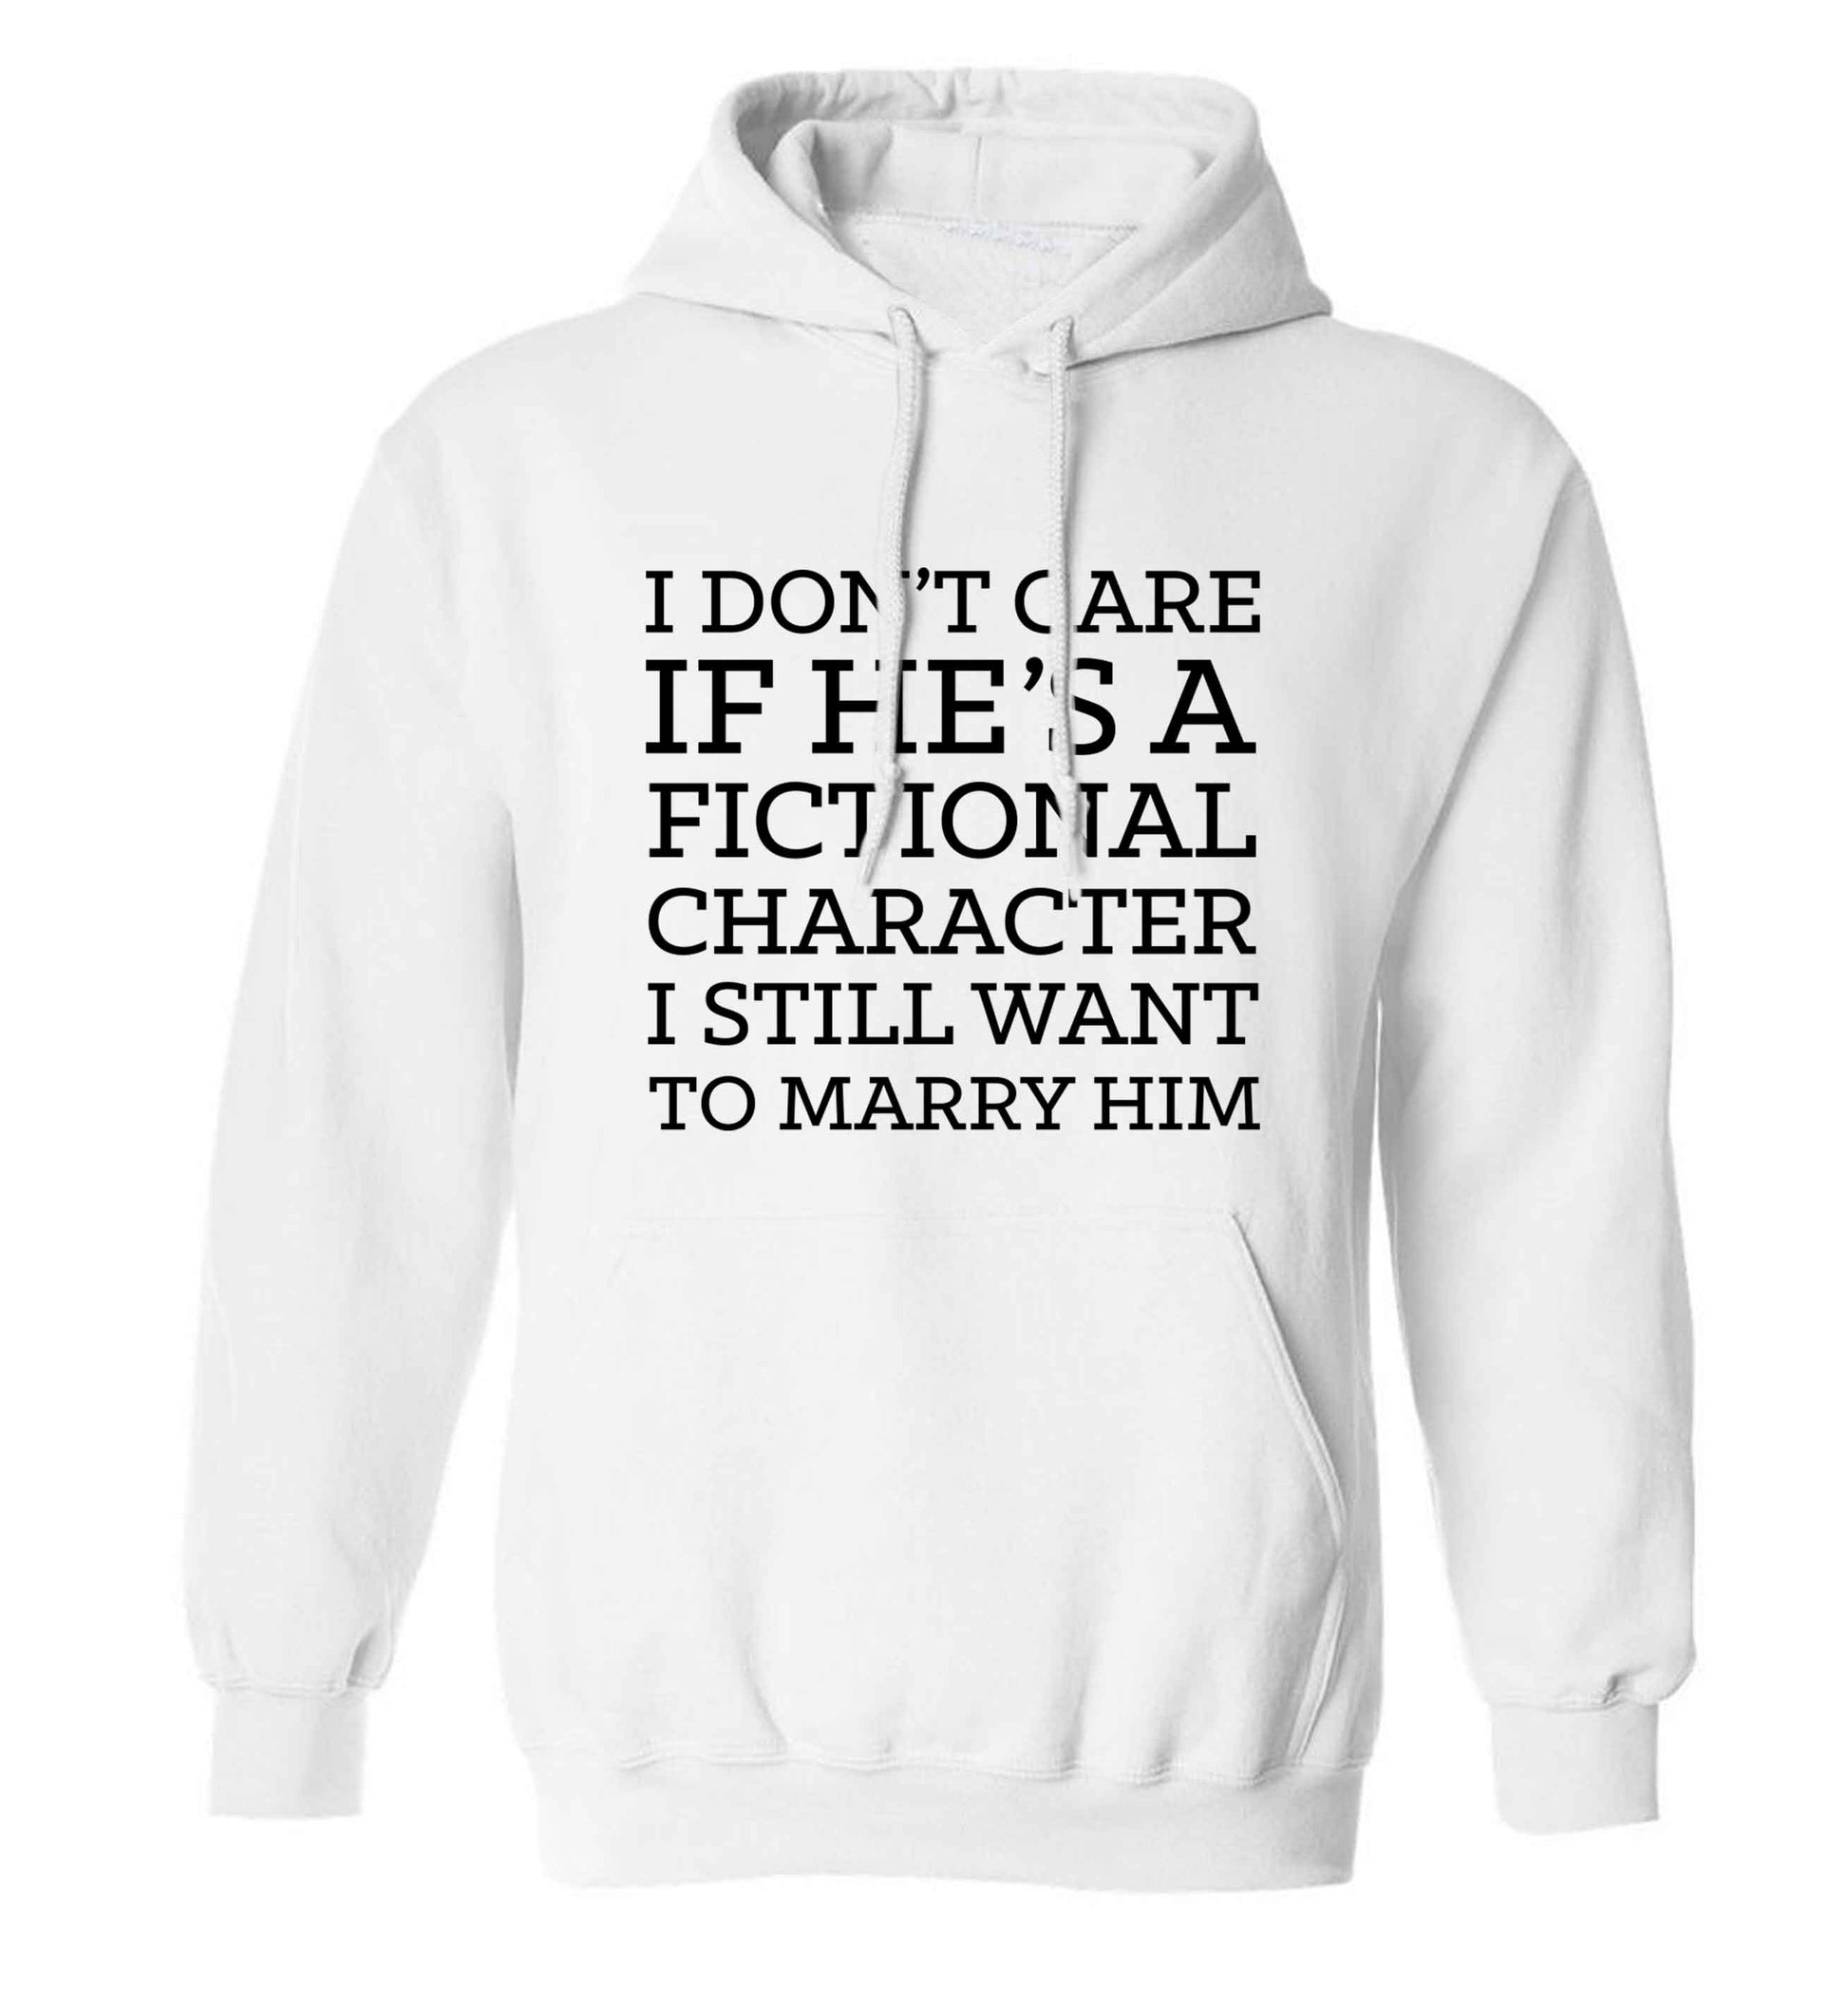 I don't care if he's a fictional character I still want to marry him adults unisex white hoodie 2XL